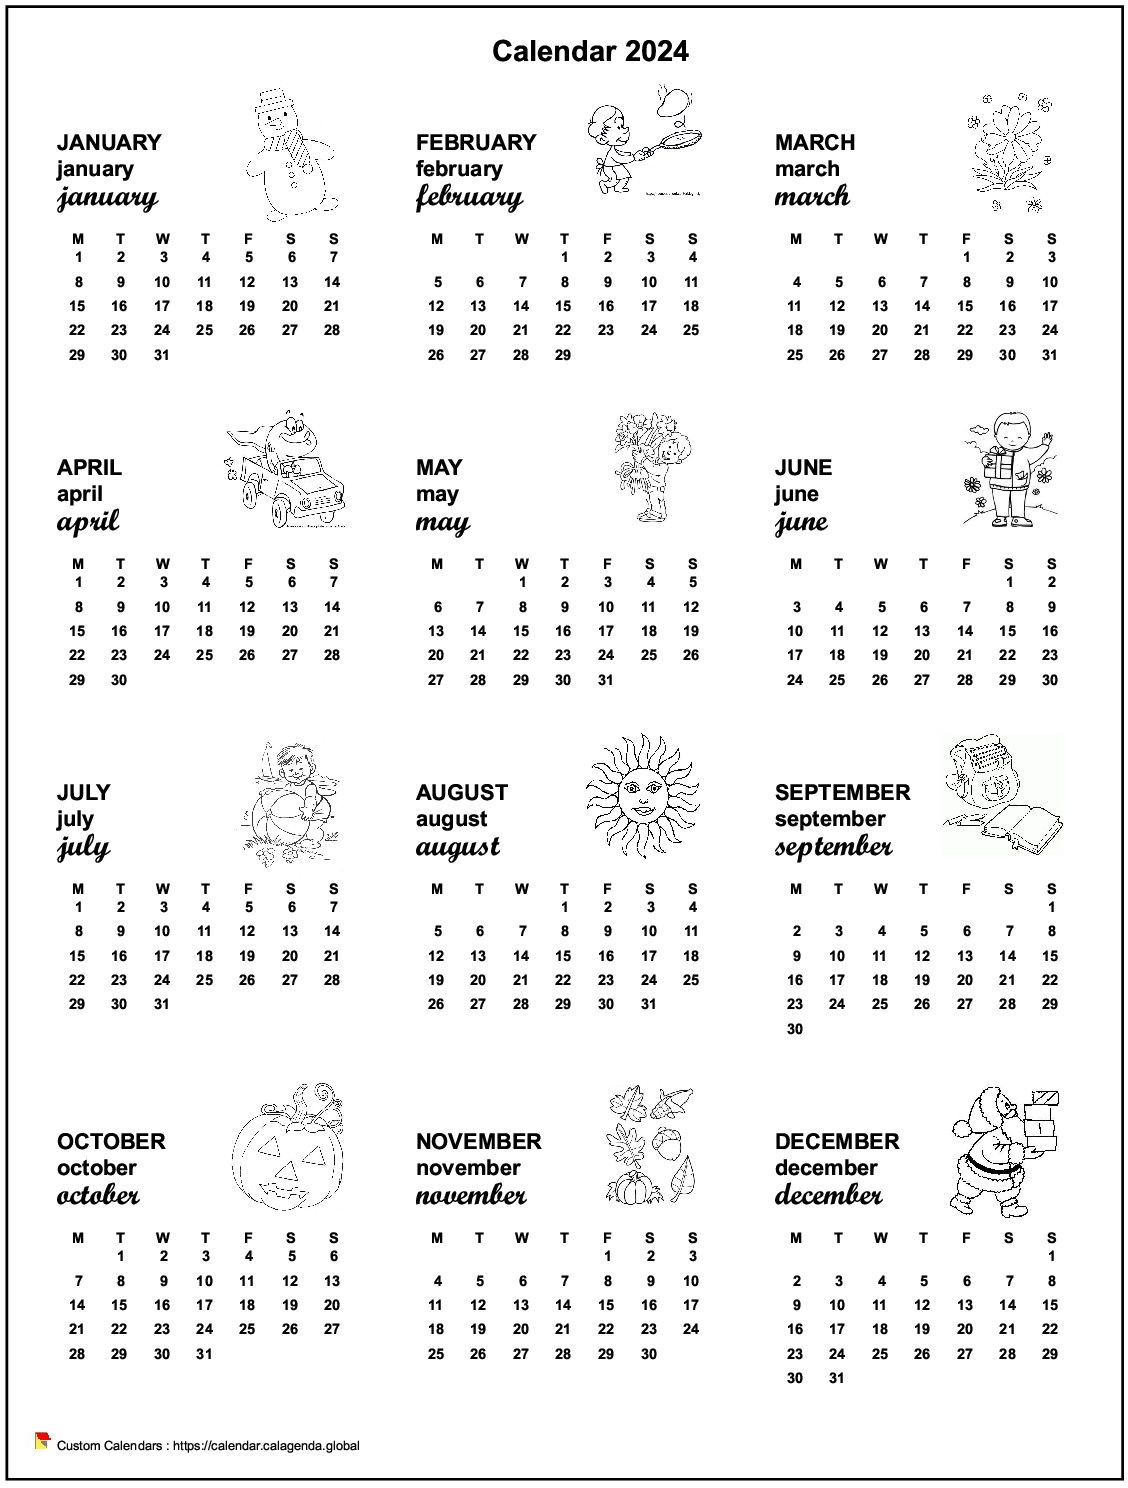 Calendar 2054 annual maternal and primary school